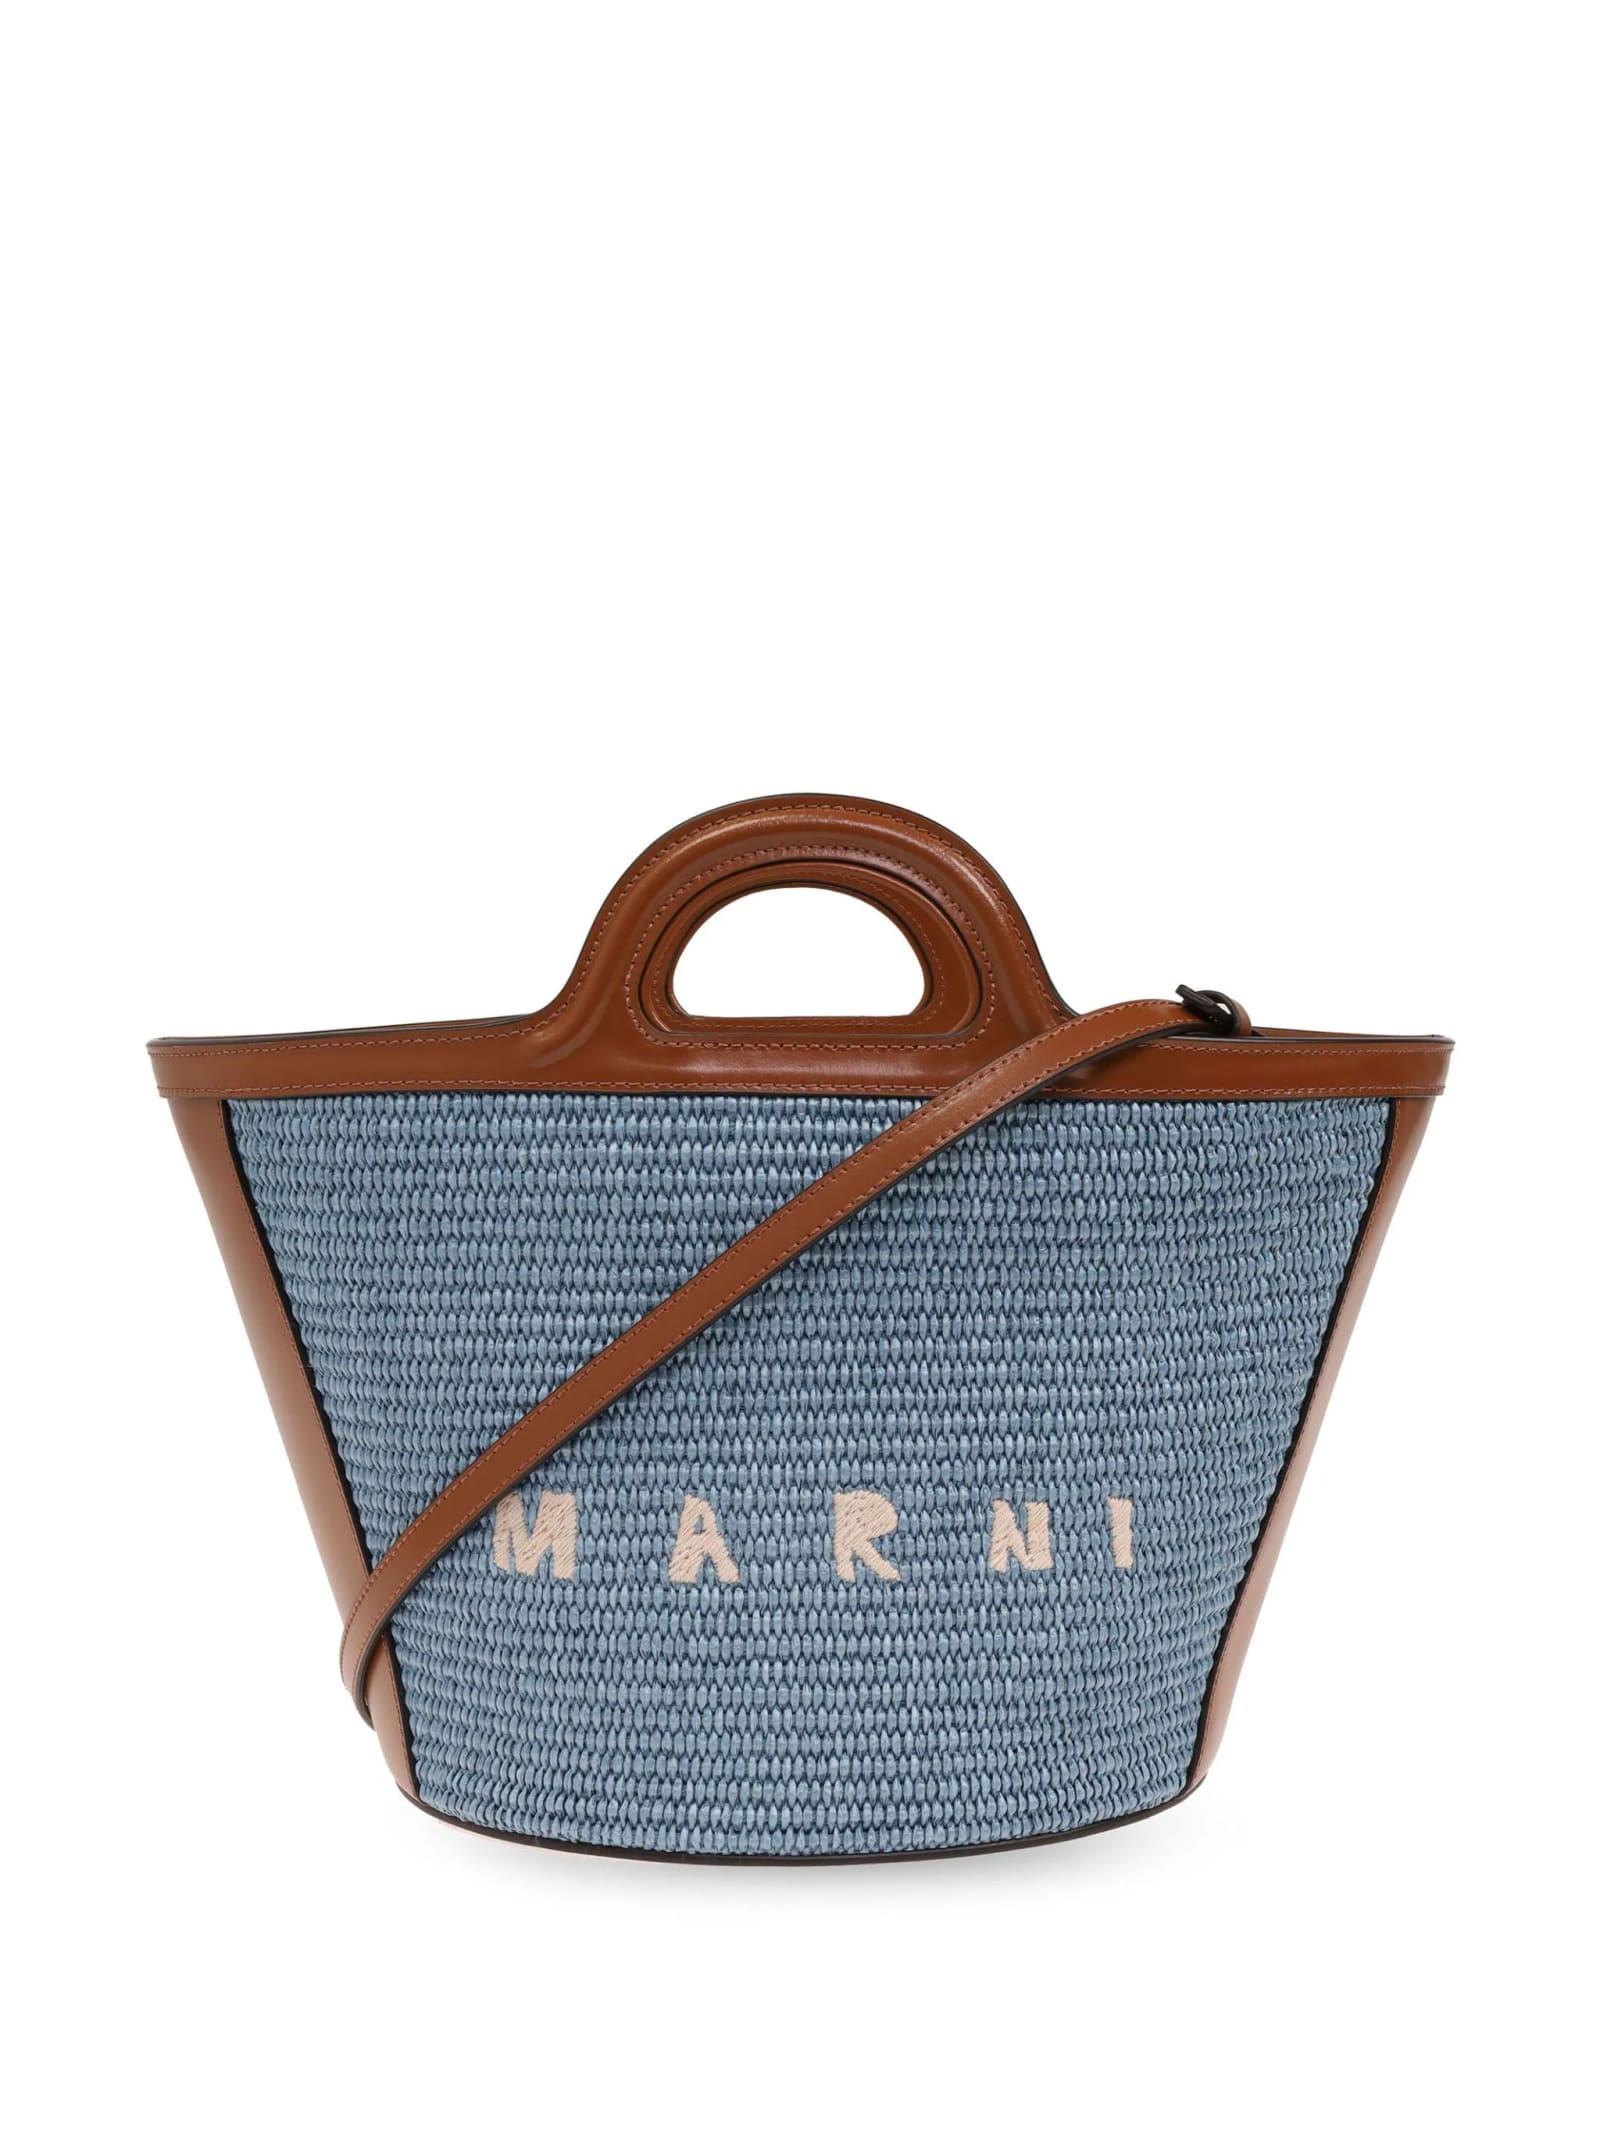 Small Tropicalia Summer Bag In Brown Leather And Light Blue Raffia